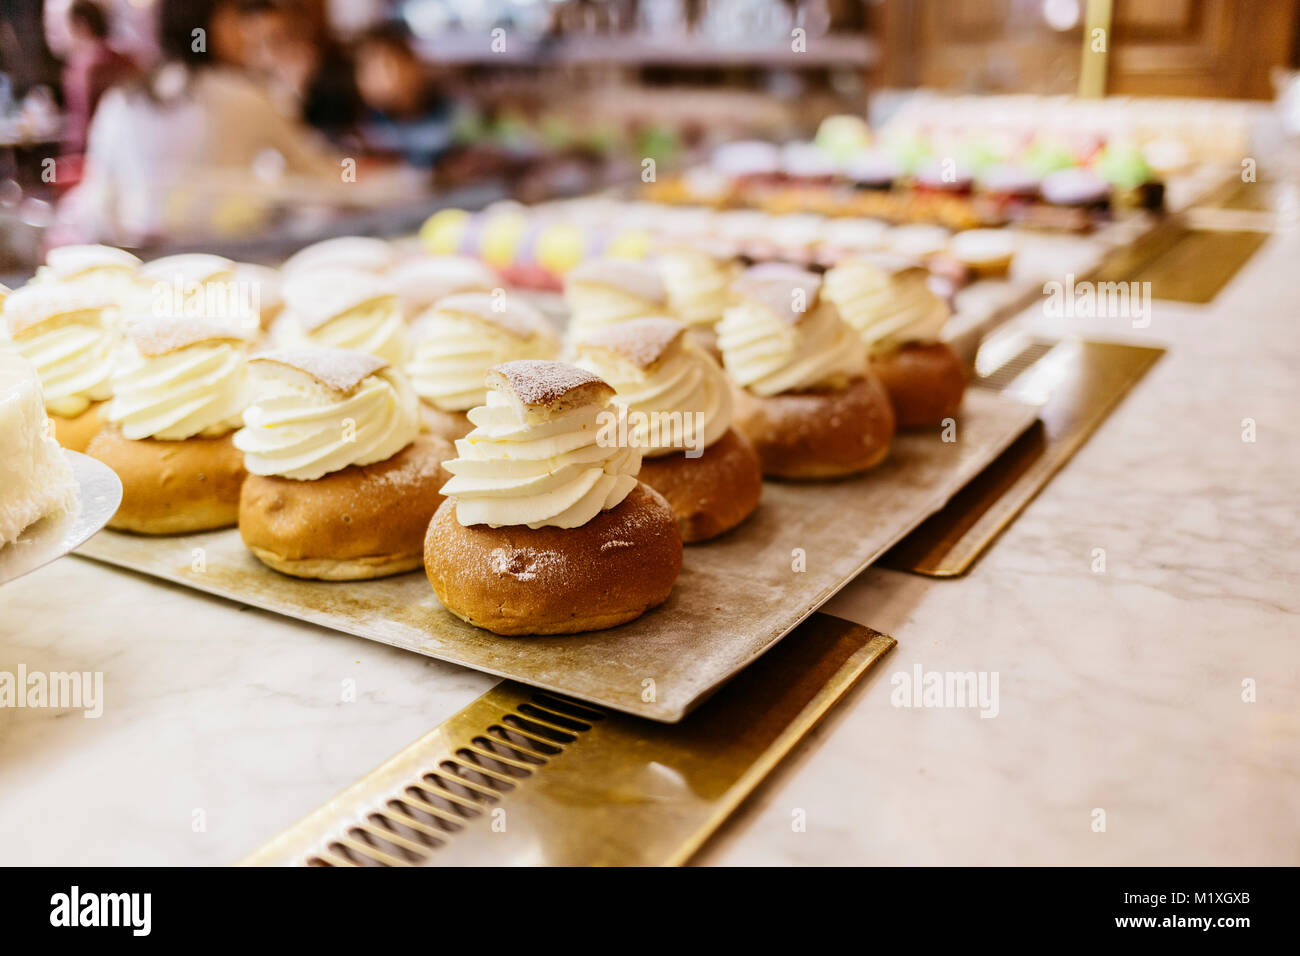 Creamed buns at a bakery in Sweden Stock Photo